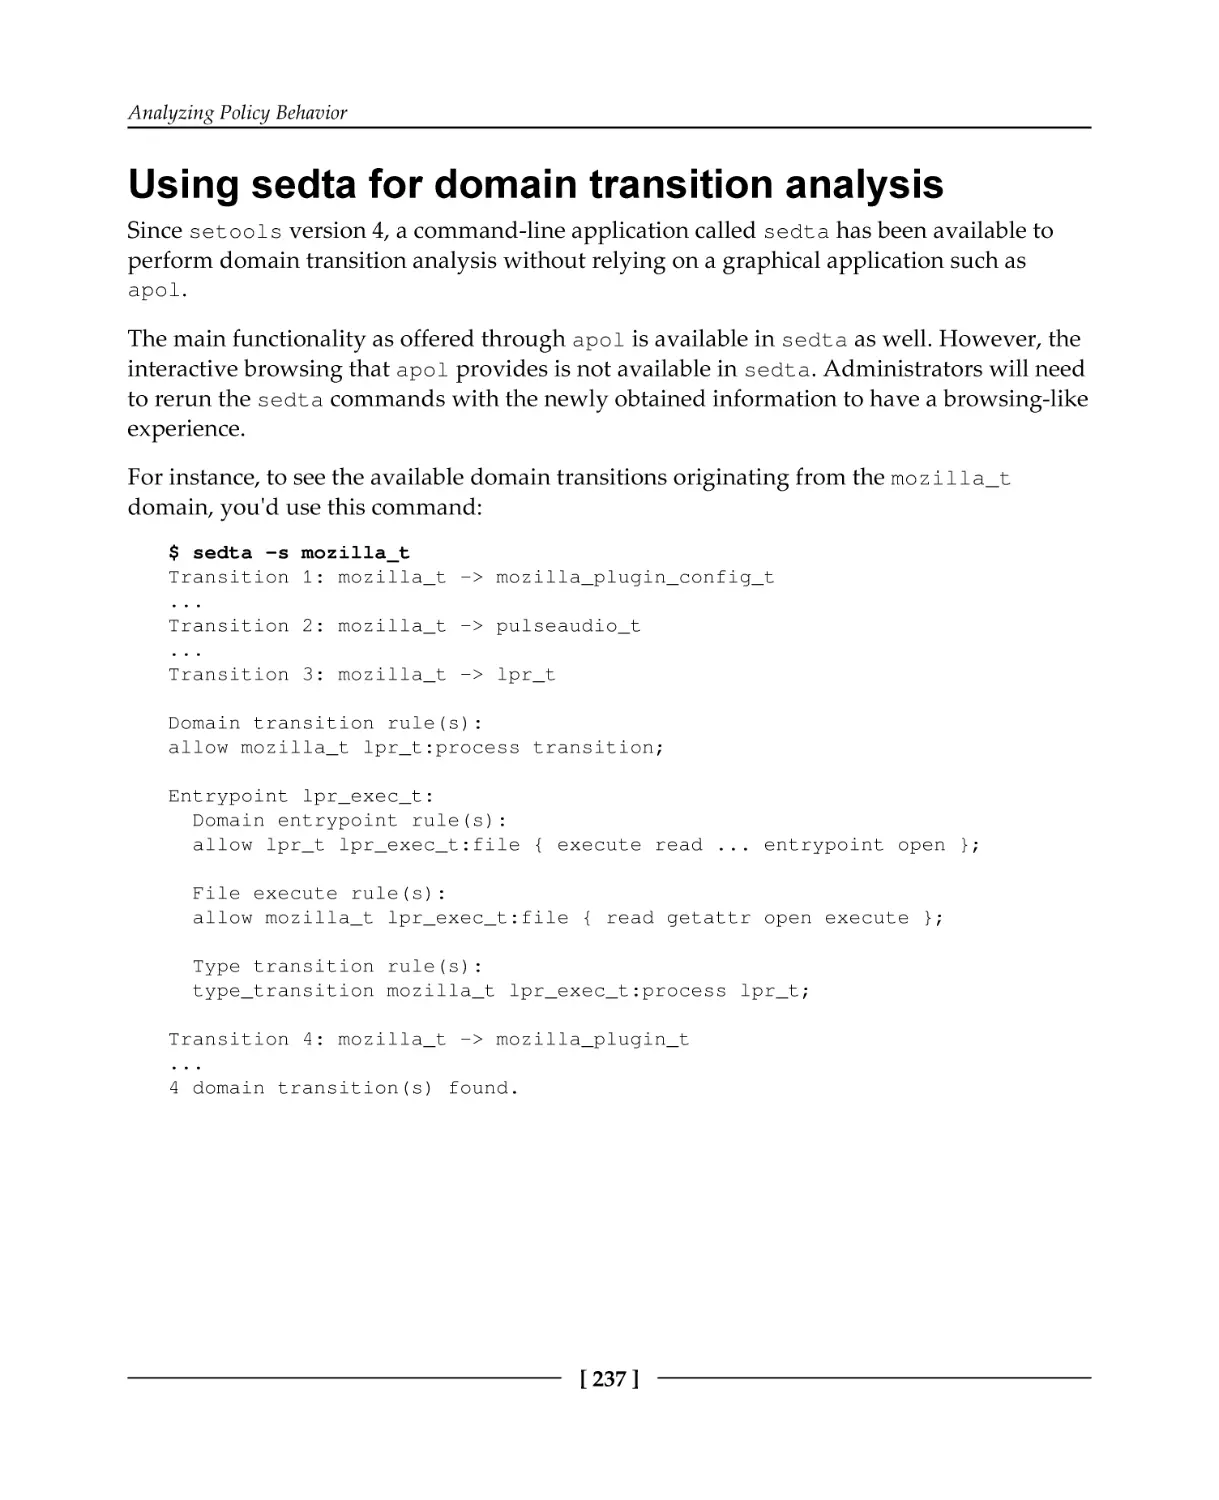 Using sedta for domain transition analysis